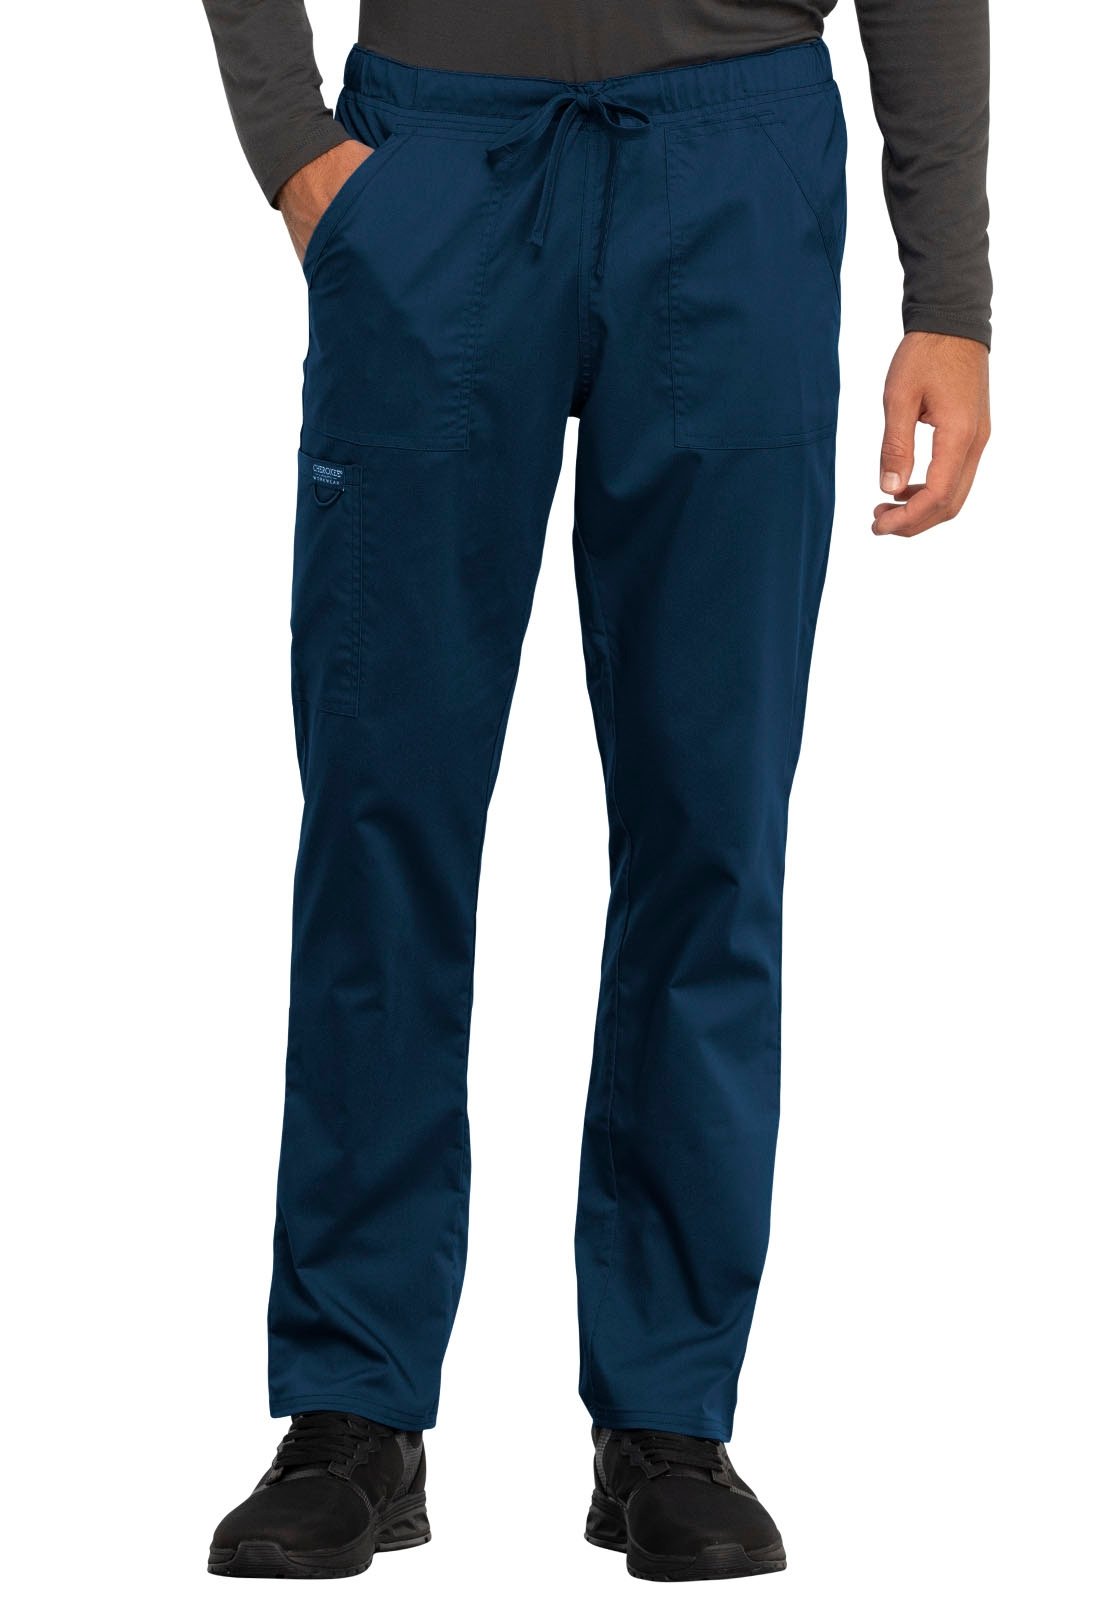 https://medicalscrubscollection.com/content/images/thumbs/0681913_cherokee-workwear-revolution-unisex-tapered-leg-drawstring-scrub-pants-ww020.jpeg